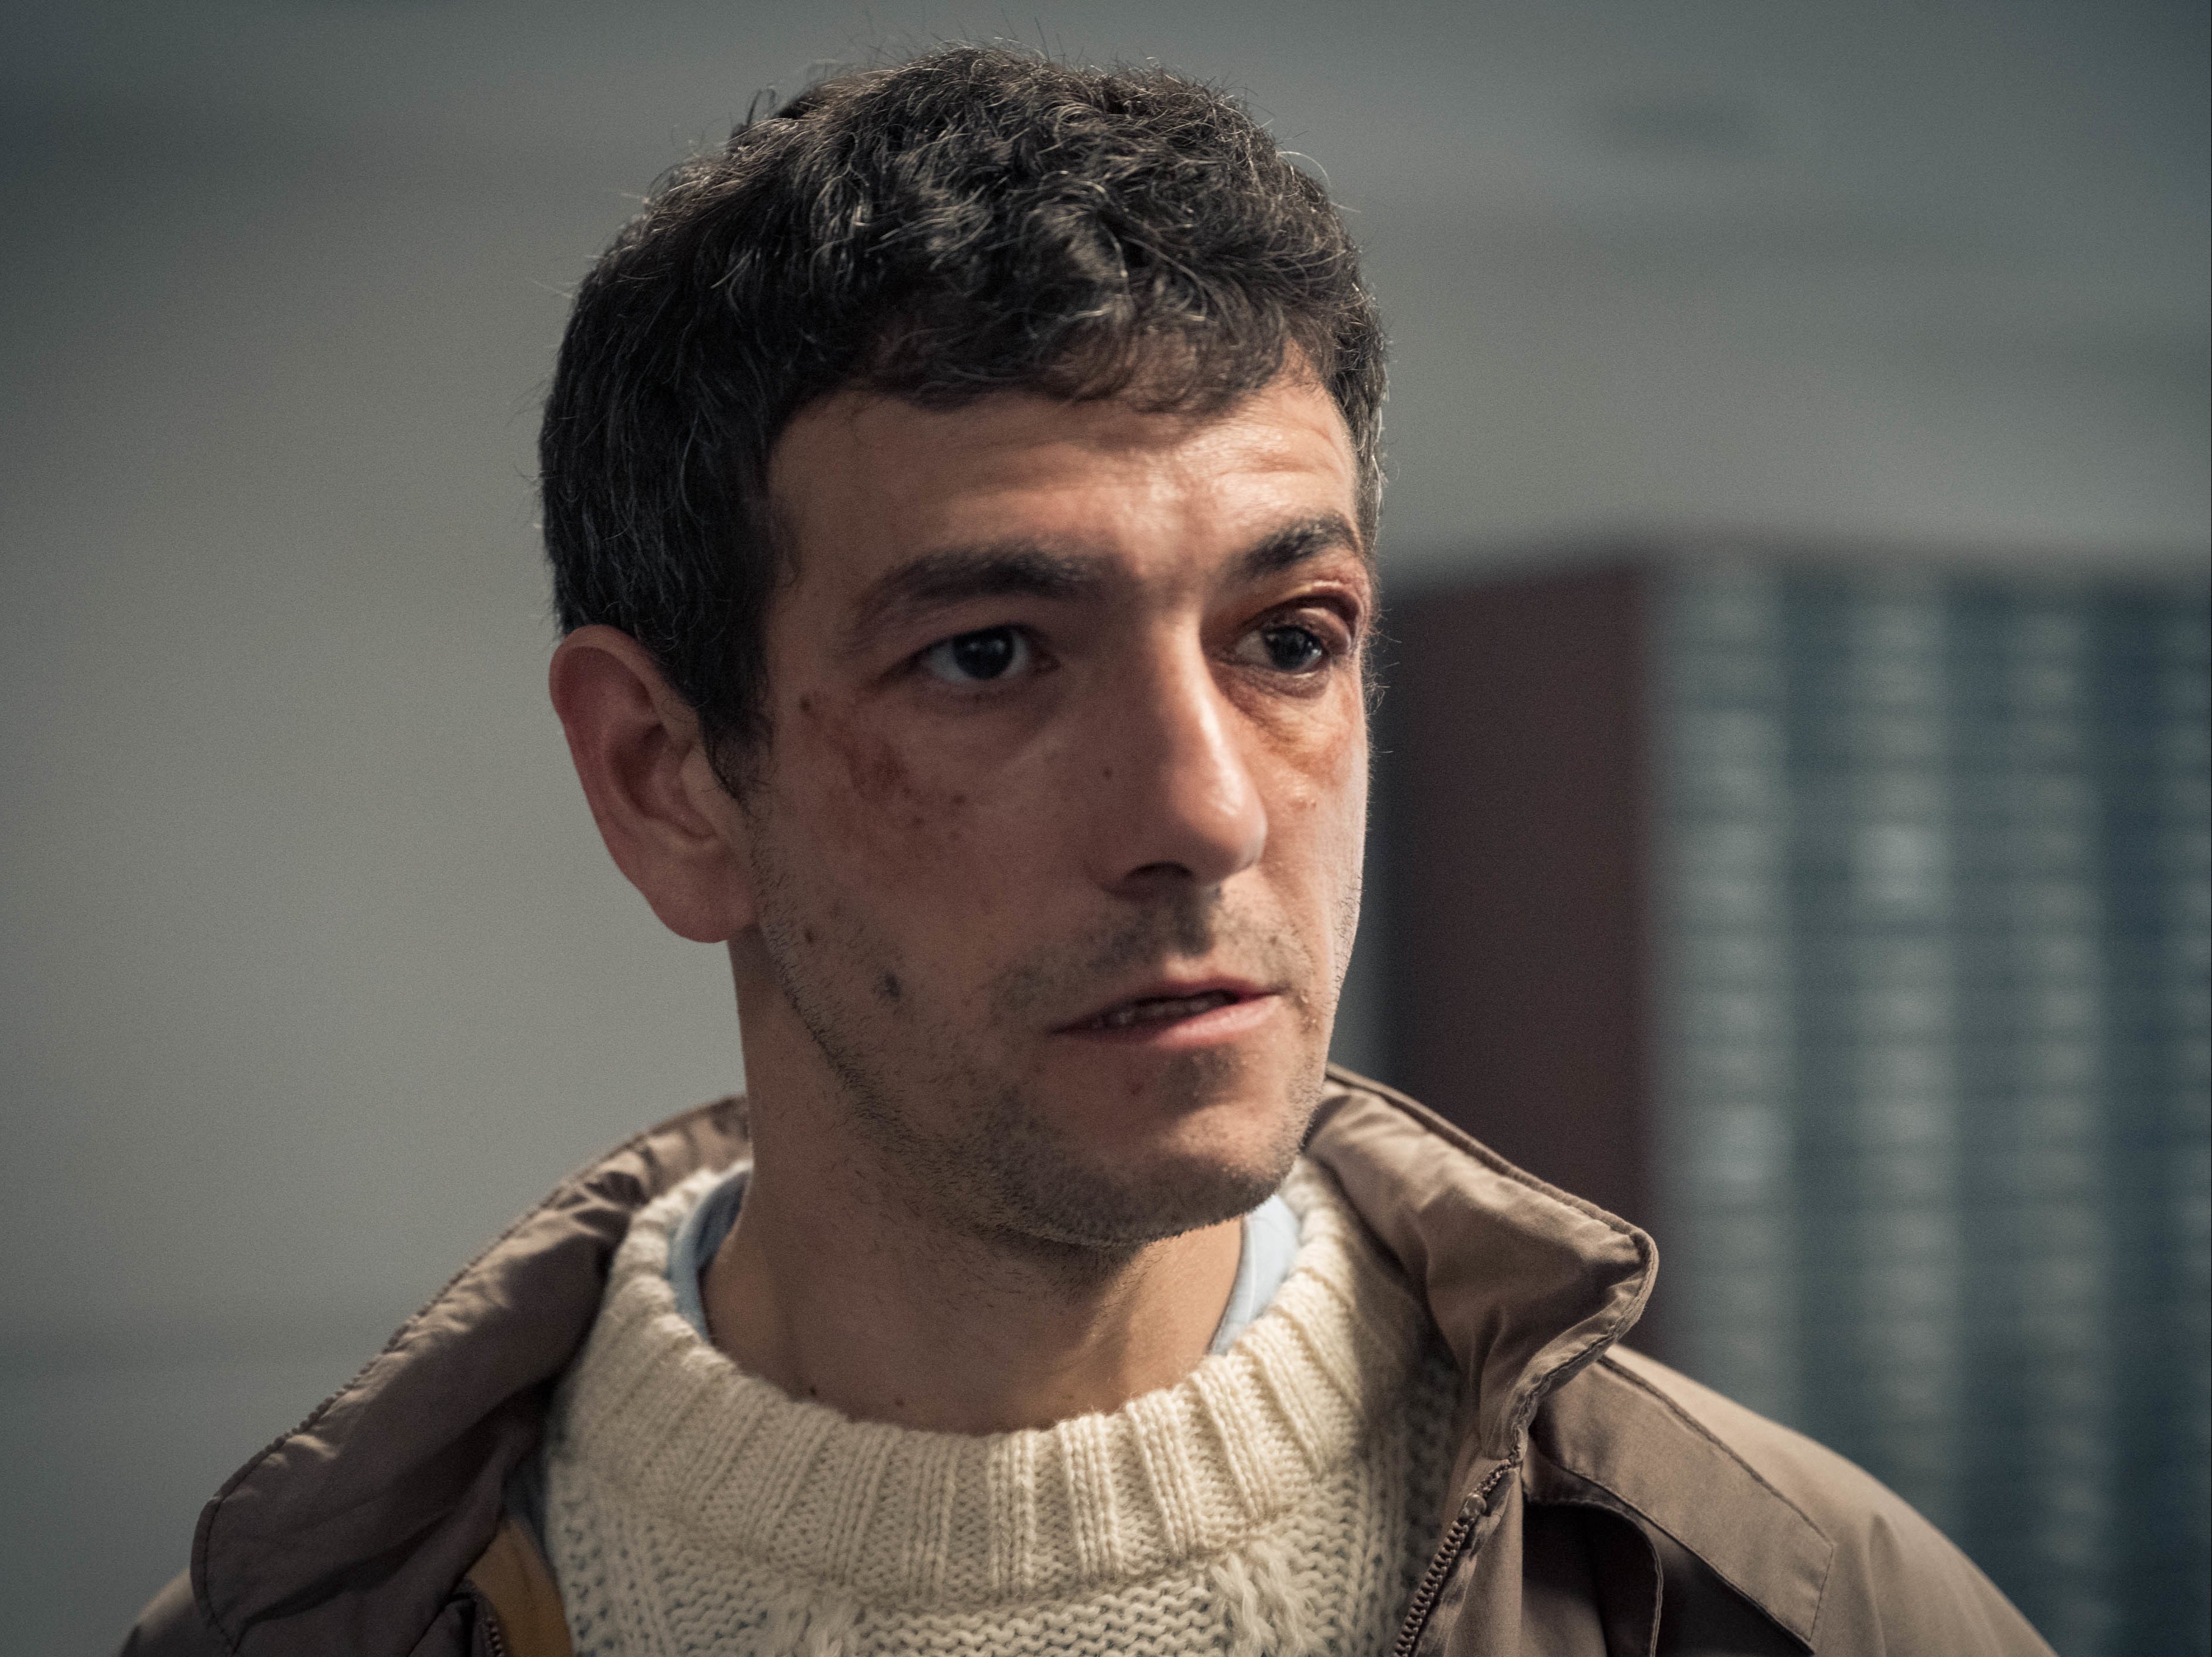 The Gold: Fact vs fiction – What's true and what's made up in the BBC's new  crime drama?